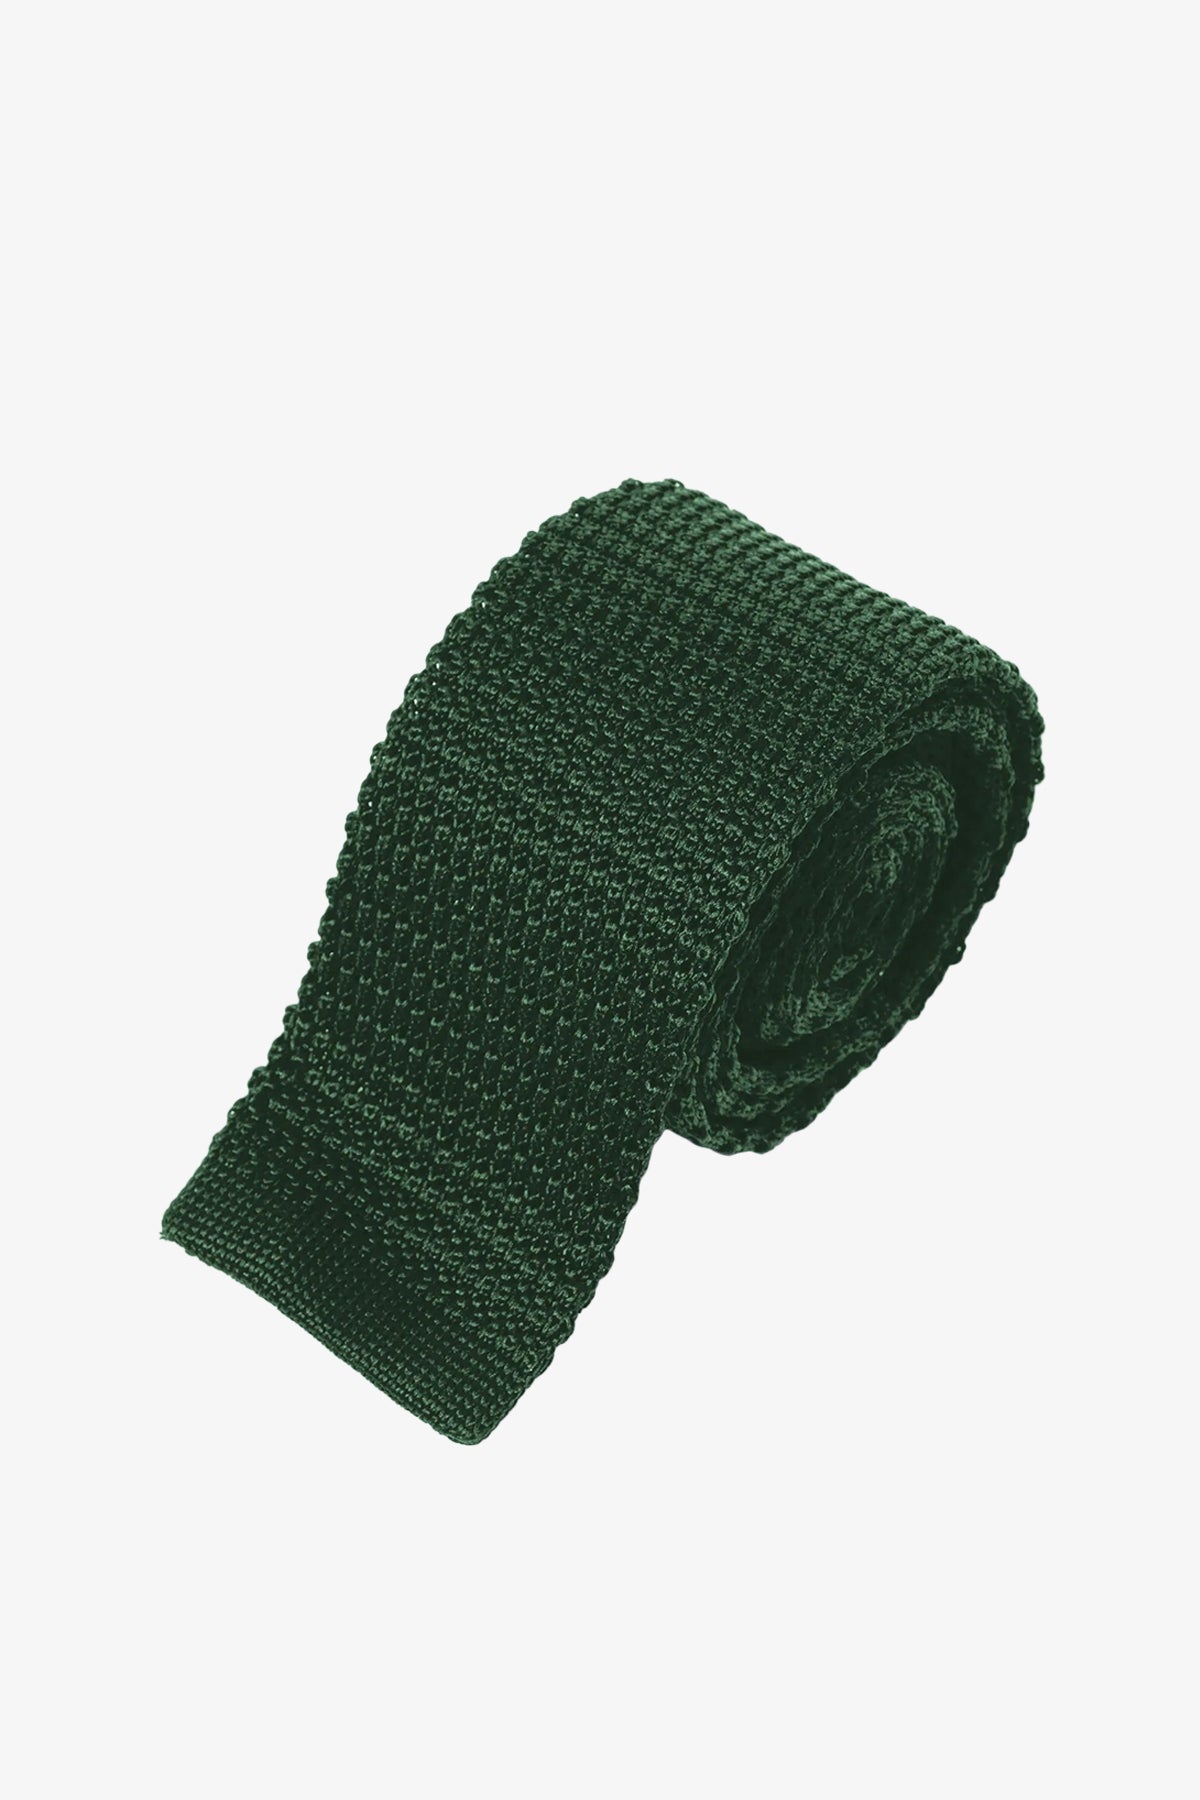 Silk Knitted Tie - Forest Green